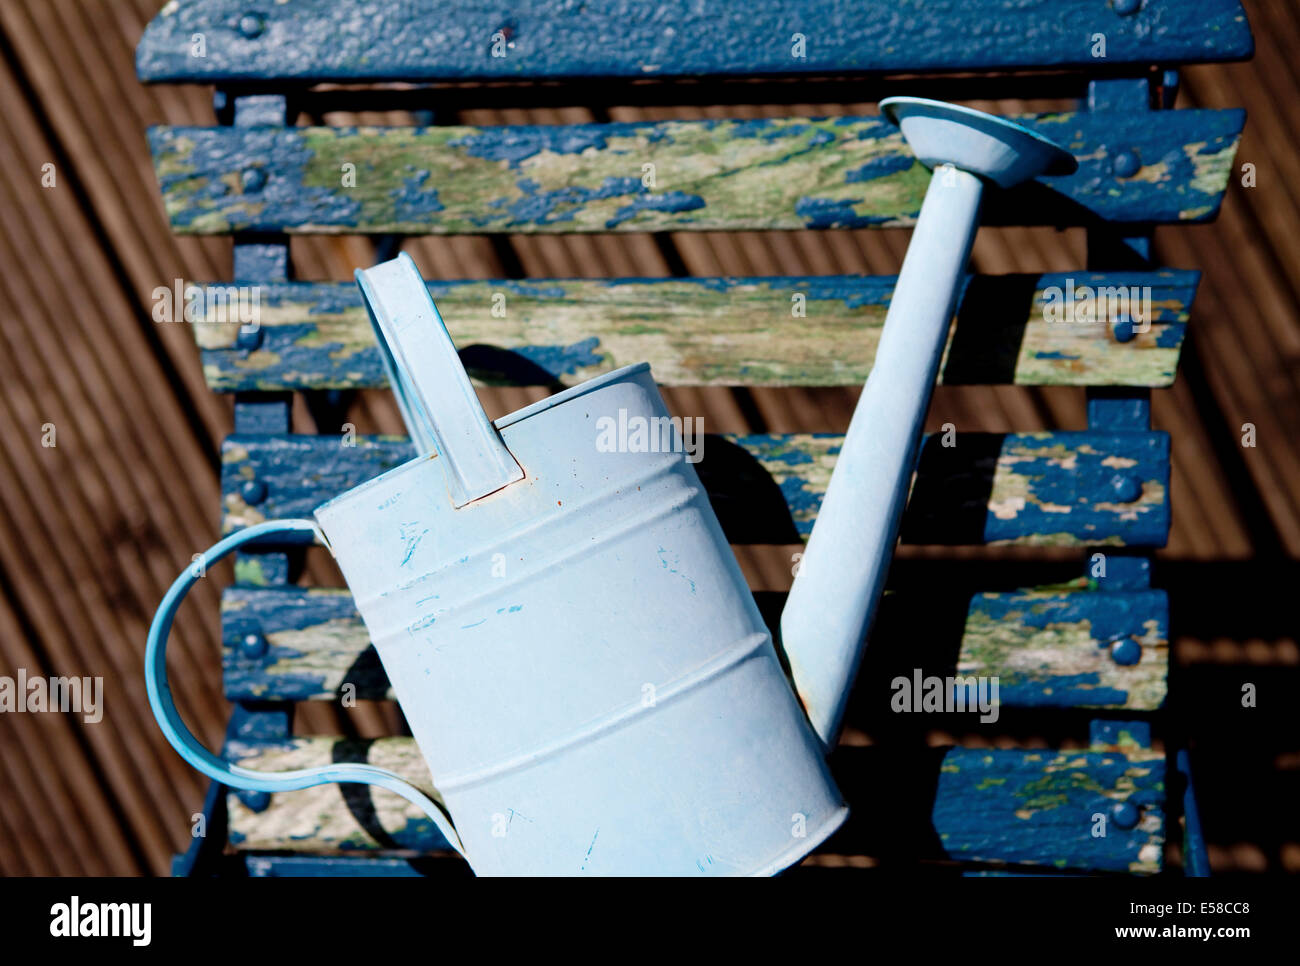 Watering can on blue chair on rooftop garden in Primrose Hill, London, UK Stock Photo